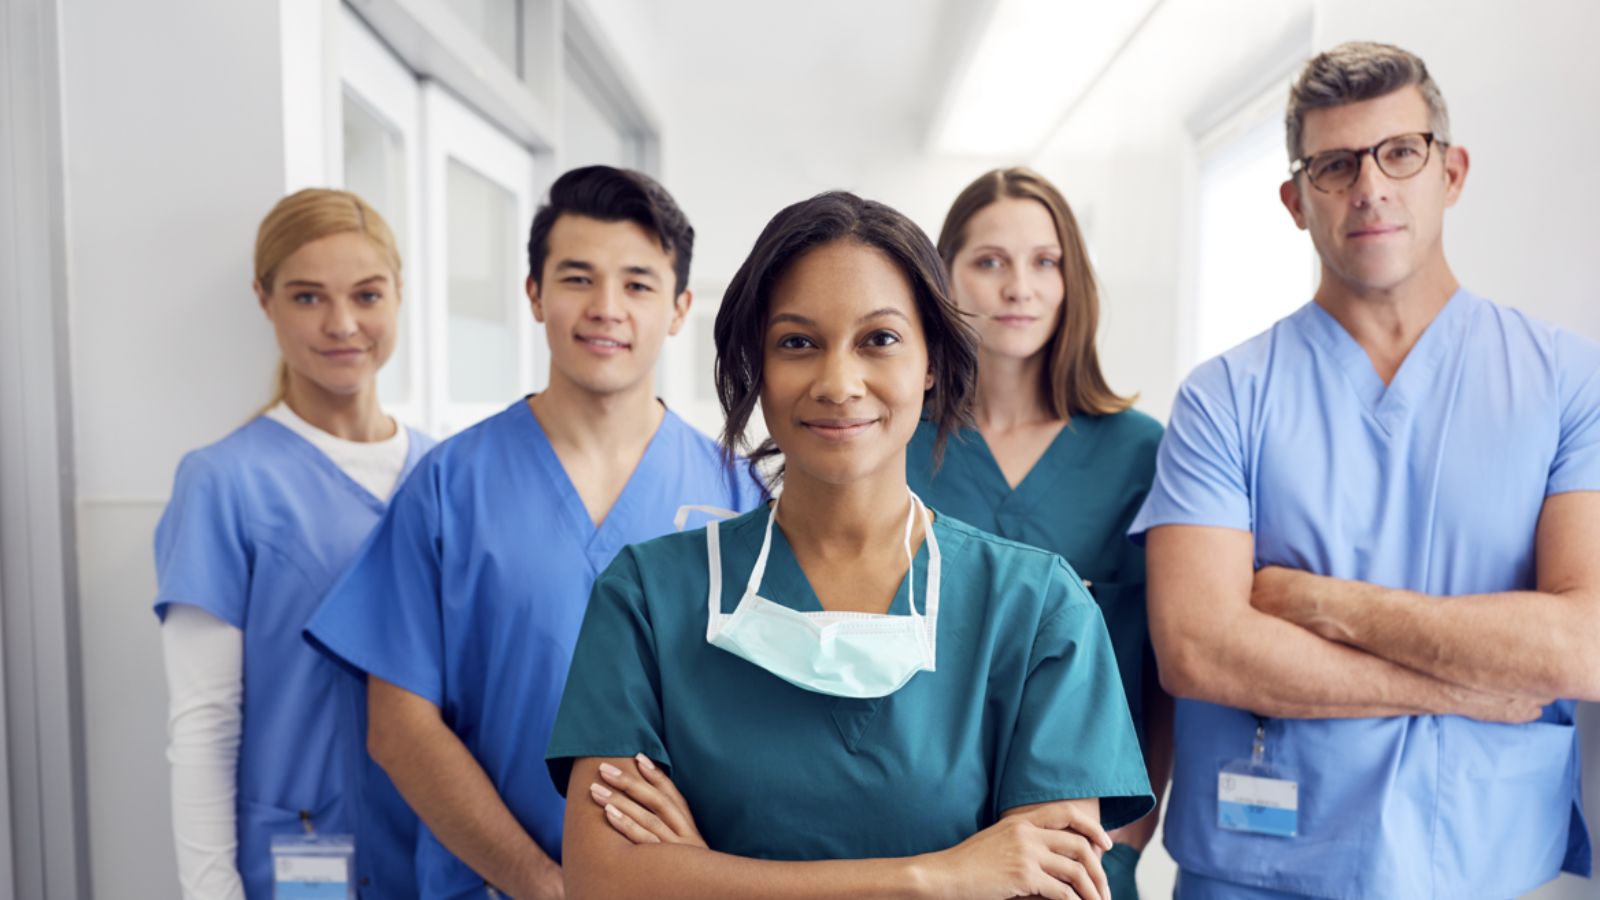 <p>We all know how registered nurses offer crucial care and support to their patients. Their skills are always needed, which means <a href="https://nursingeducation.org/blog/highest-paid-nursing-roles-america/">job stability and good pay</a>. Plus, many nurses get great benefits and chances to move up the career ladder, so it’s a rewarding job both financially and personally.</p>